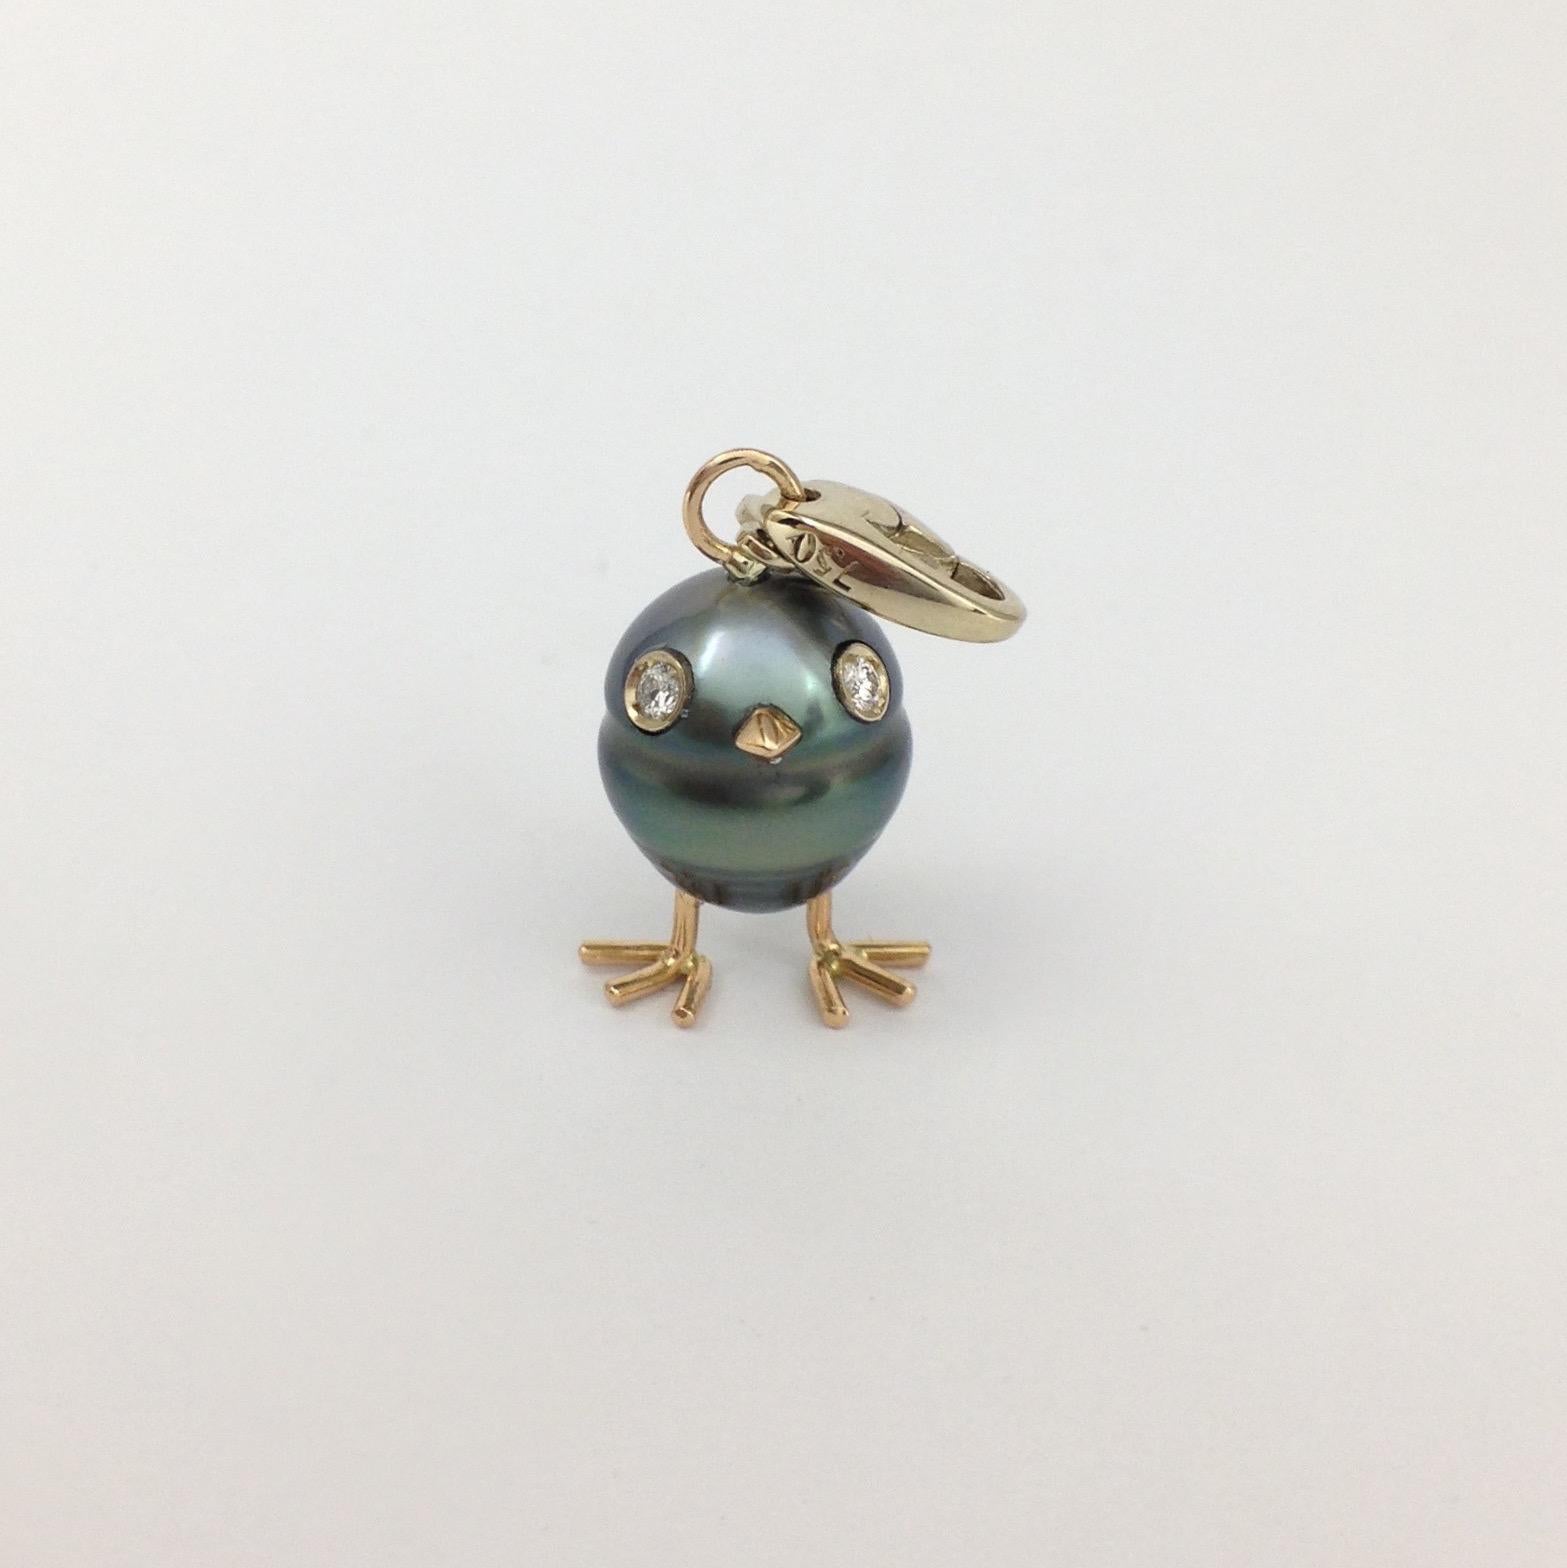 A Tahitian pearl has been carefully crafted to make a chick. He has his two legs, two eyes encrusted with two white diamonds and his beak. 
The gold is white for the eyes and the carabiner, for the other particulars it's red.
The caliber is ct